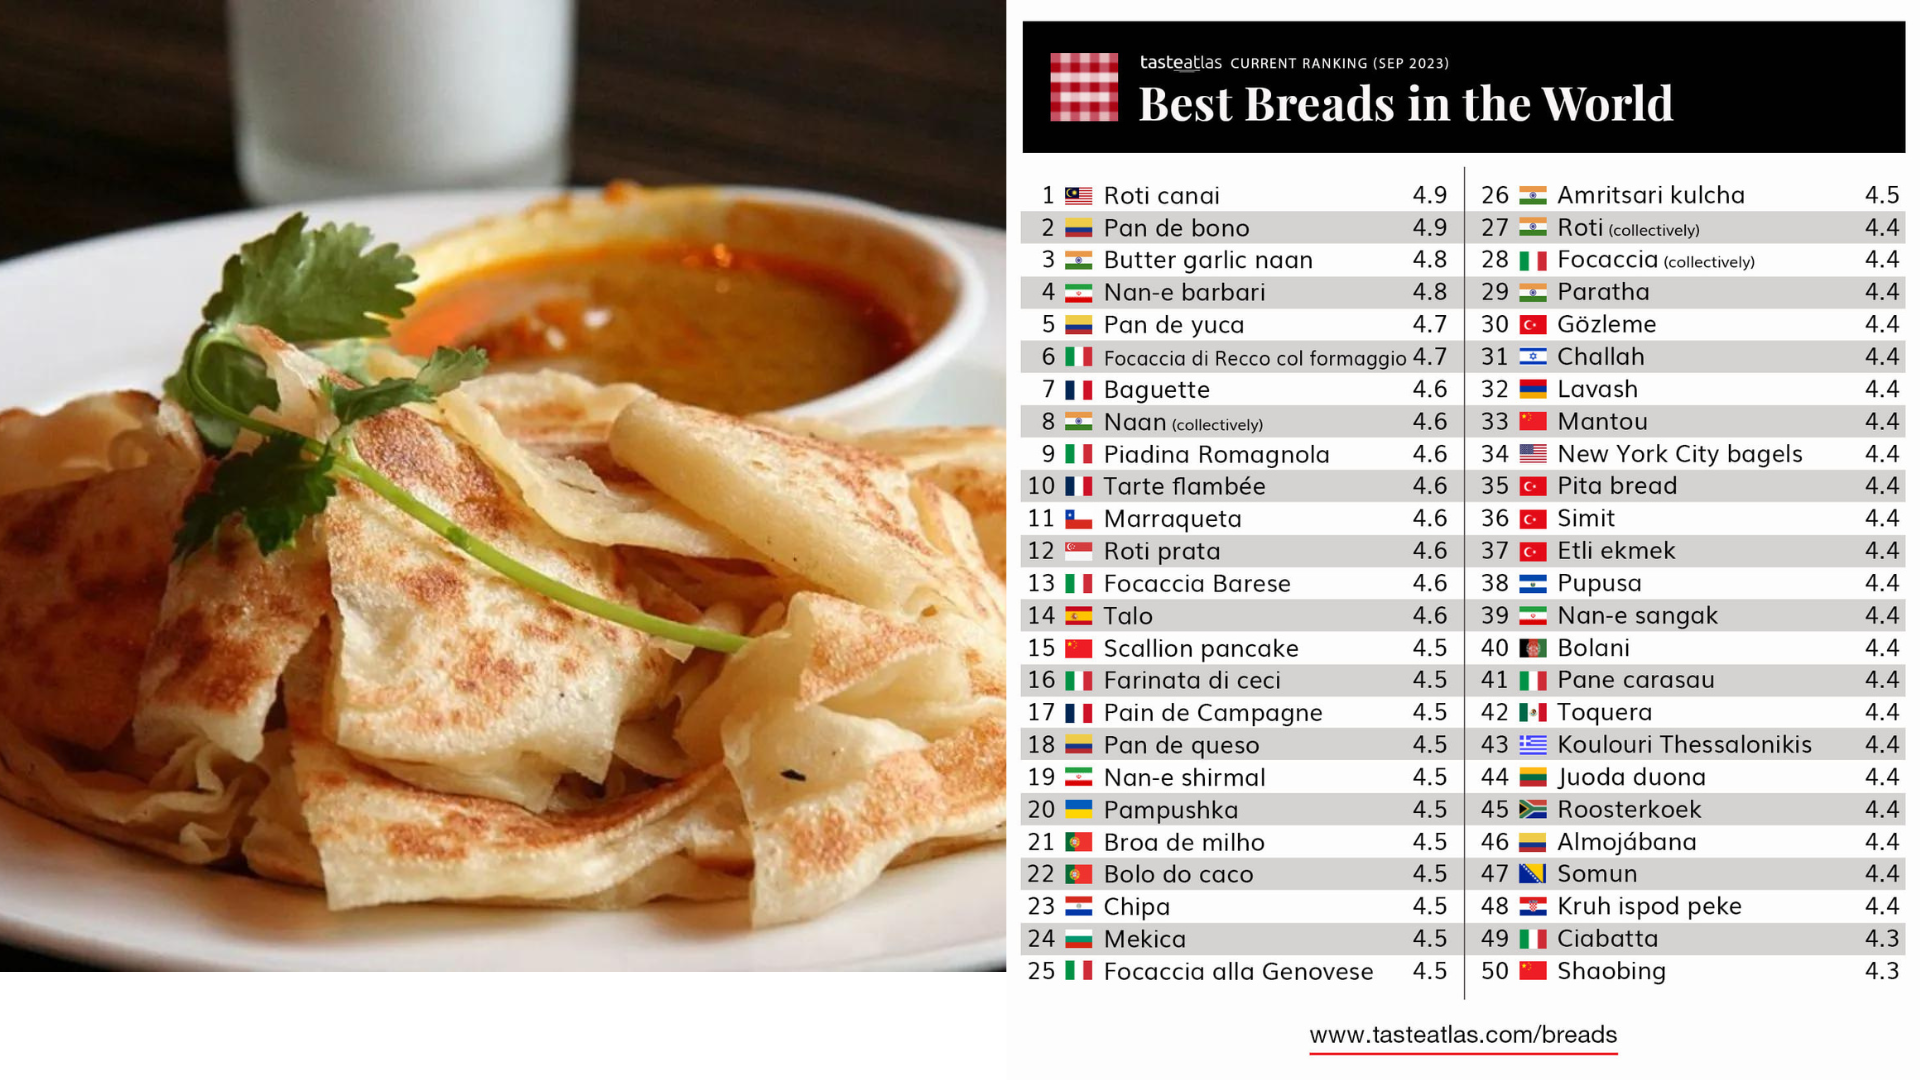 Meanwhile Roti Prata was ranked #12. It just shows we have better food than Singapore👀